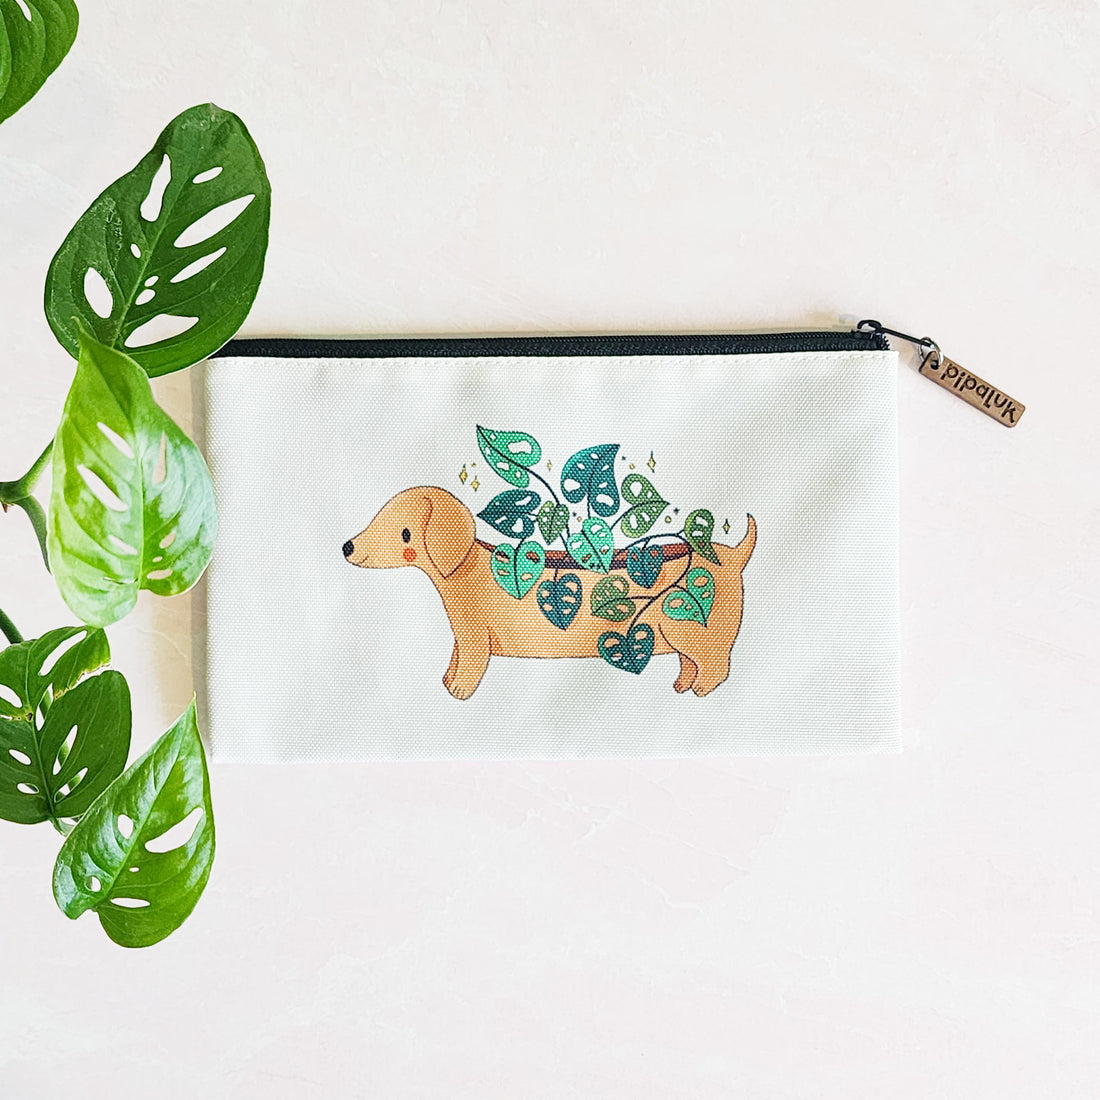 zipper pouch with a dachshund planter growing a cheese plant